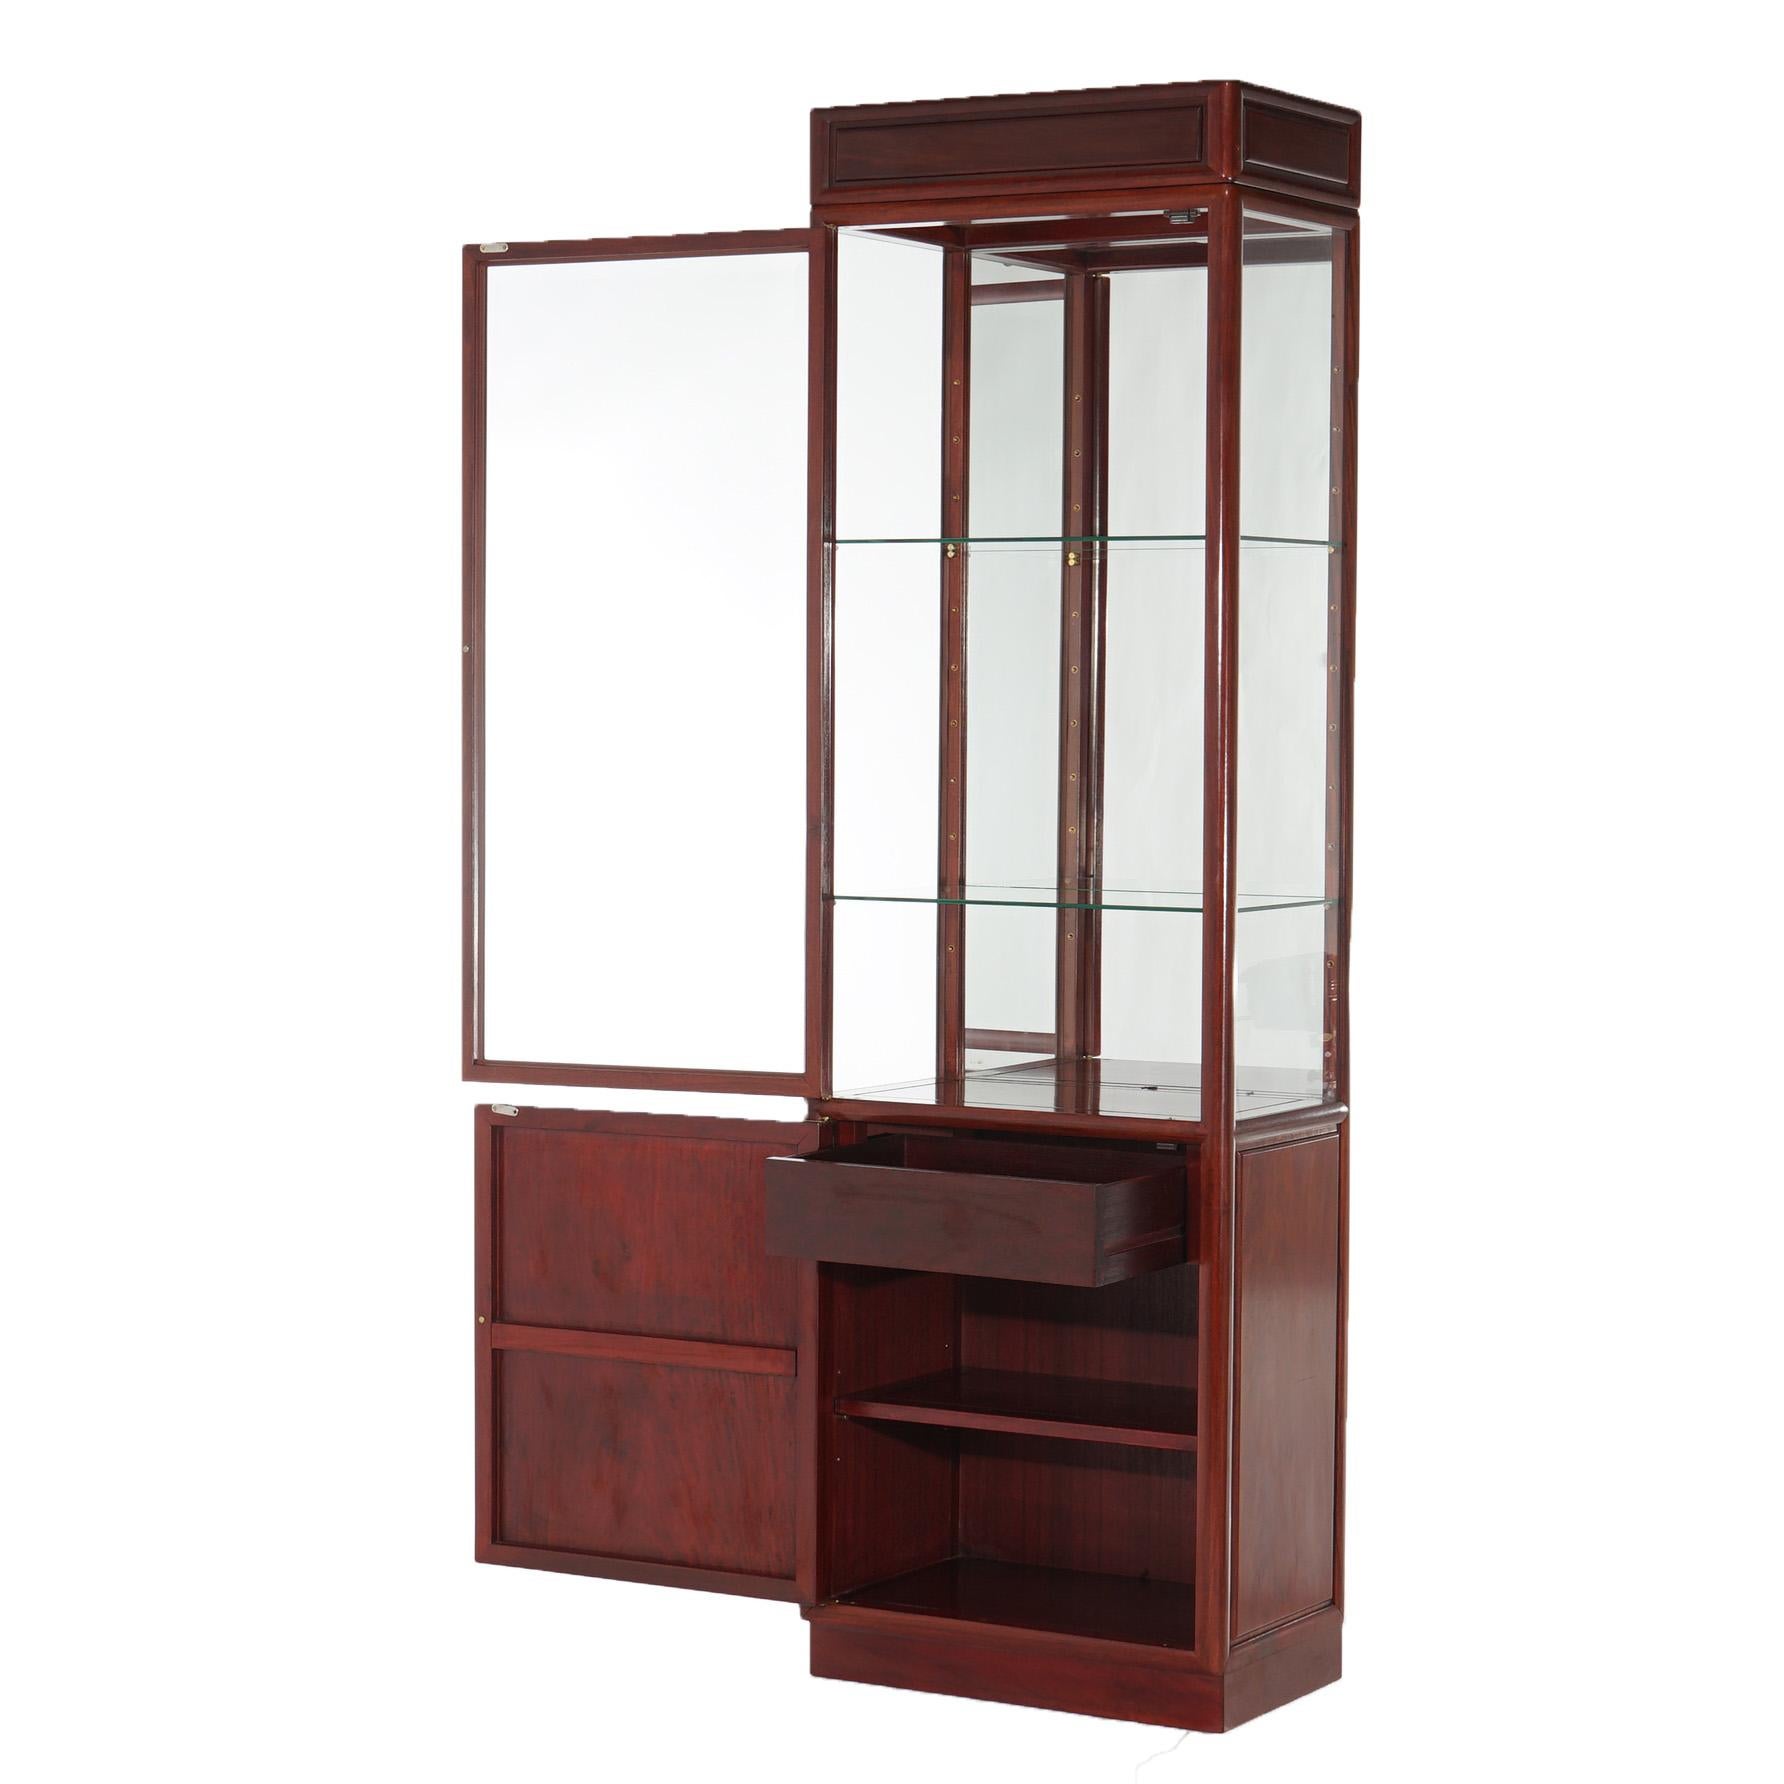 ***Ask About Reduced In-House Delivery Rates - Reliable Professional Service & Fully Insured***
Vintage Chinese Mahogany Display Case with Lower Blind Door Cabinet having Carved Symbol, C1960

Measures- 80''H x 24''W x 15.5''D